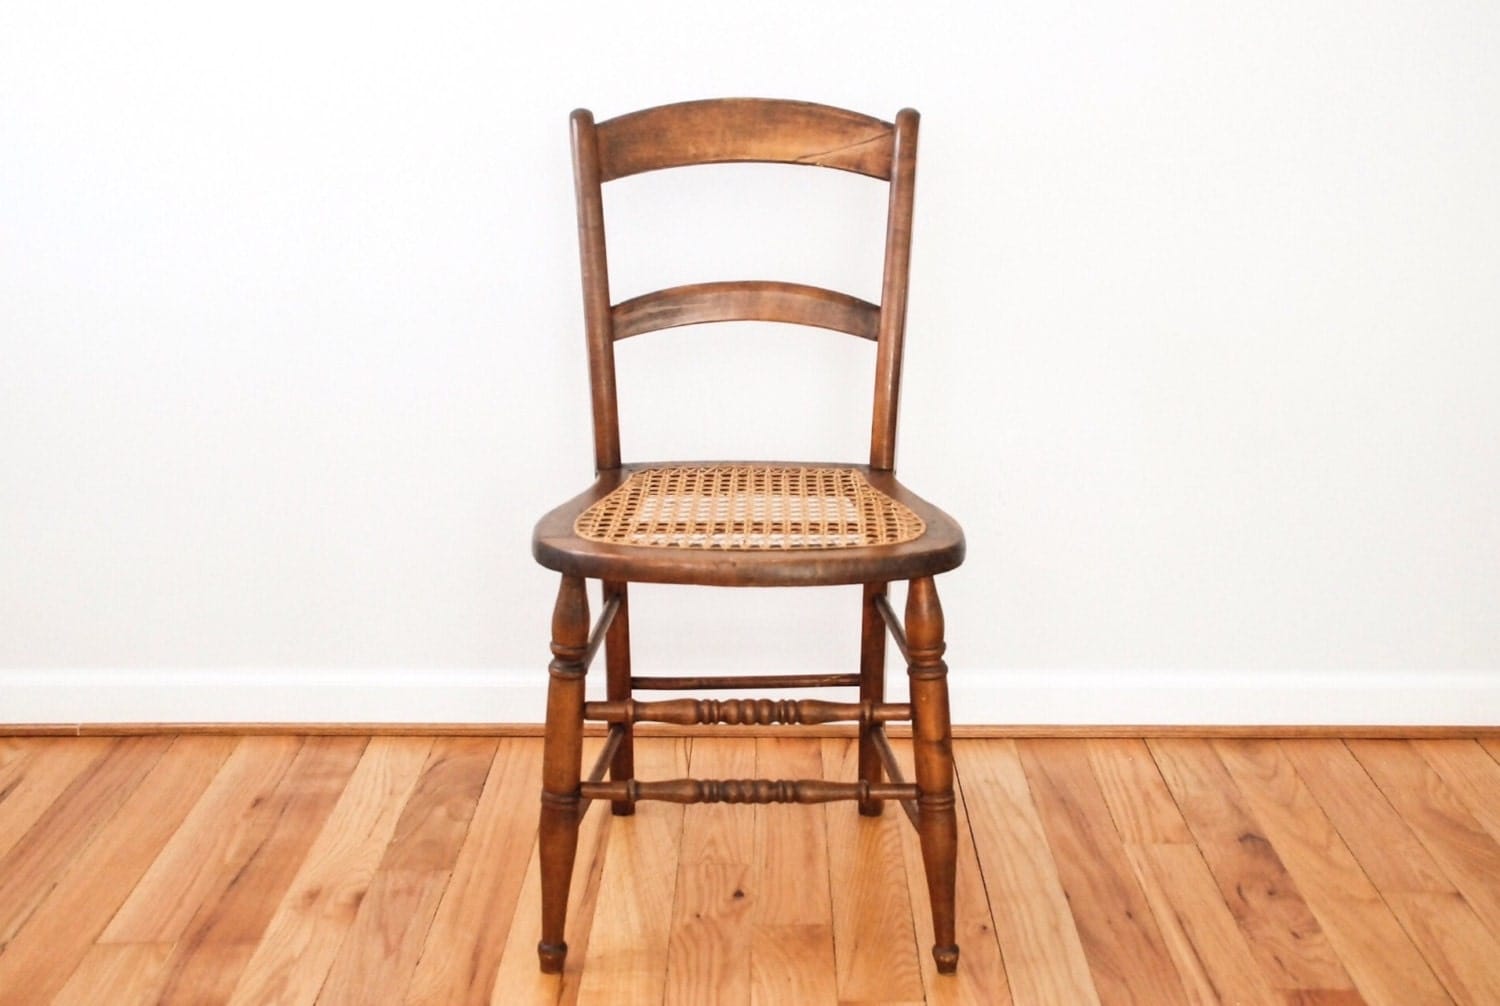 antique wicker chair, antique caned chair, cane chair, wood chair